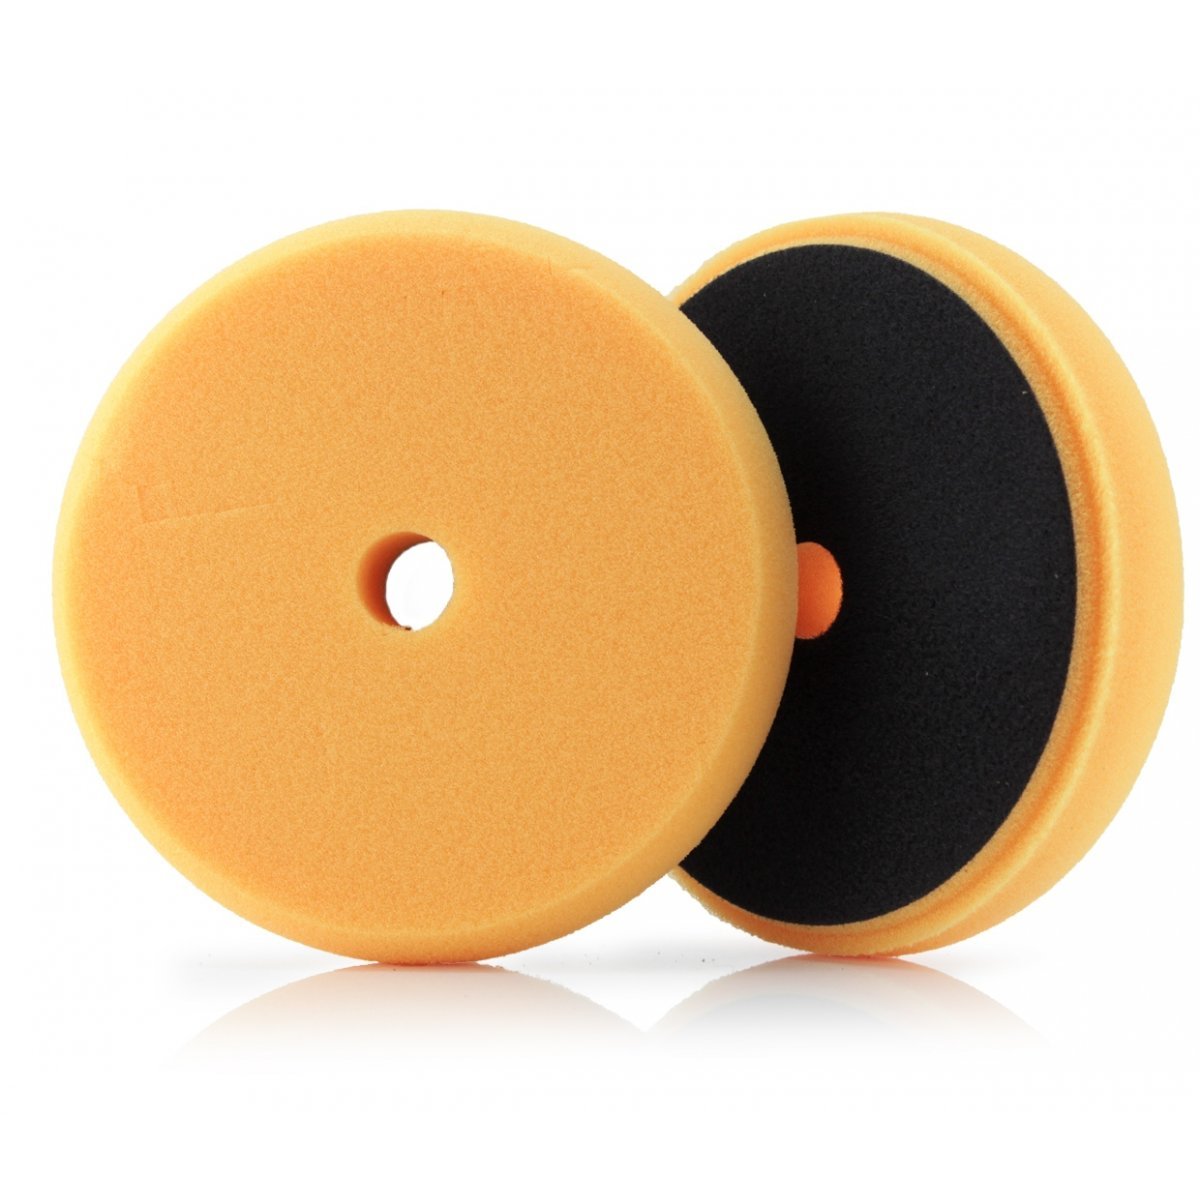 Scholl Concepts Gold Spider Polishing Pad